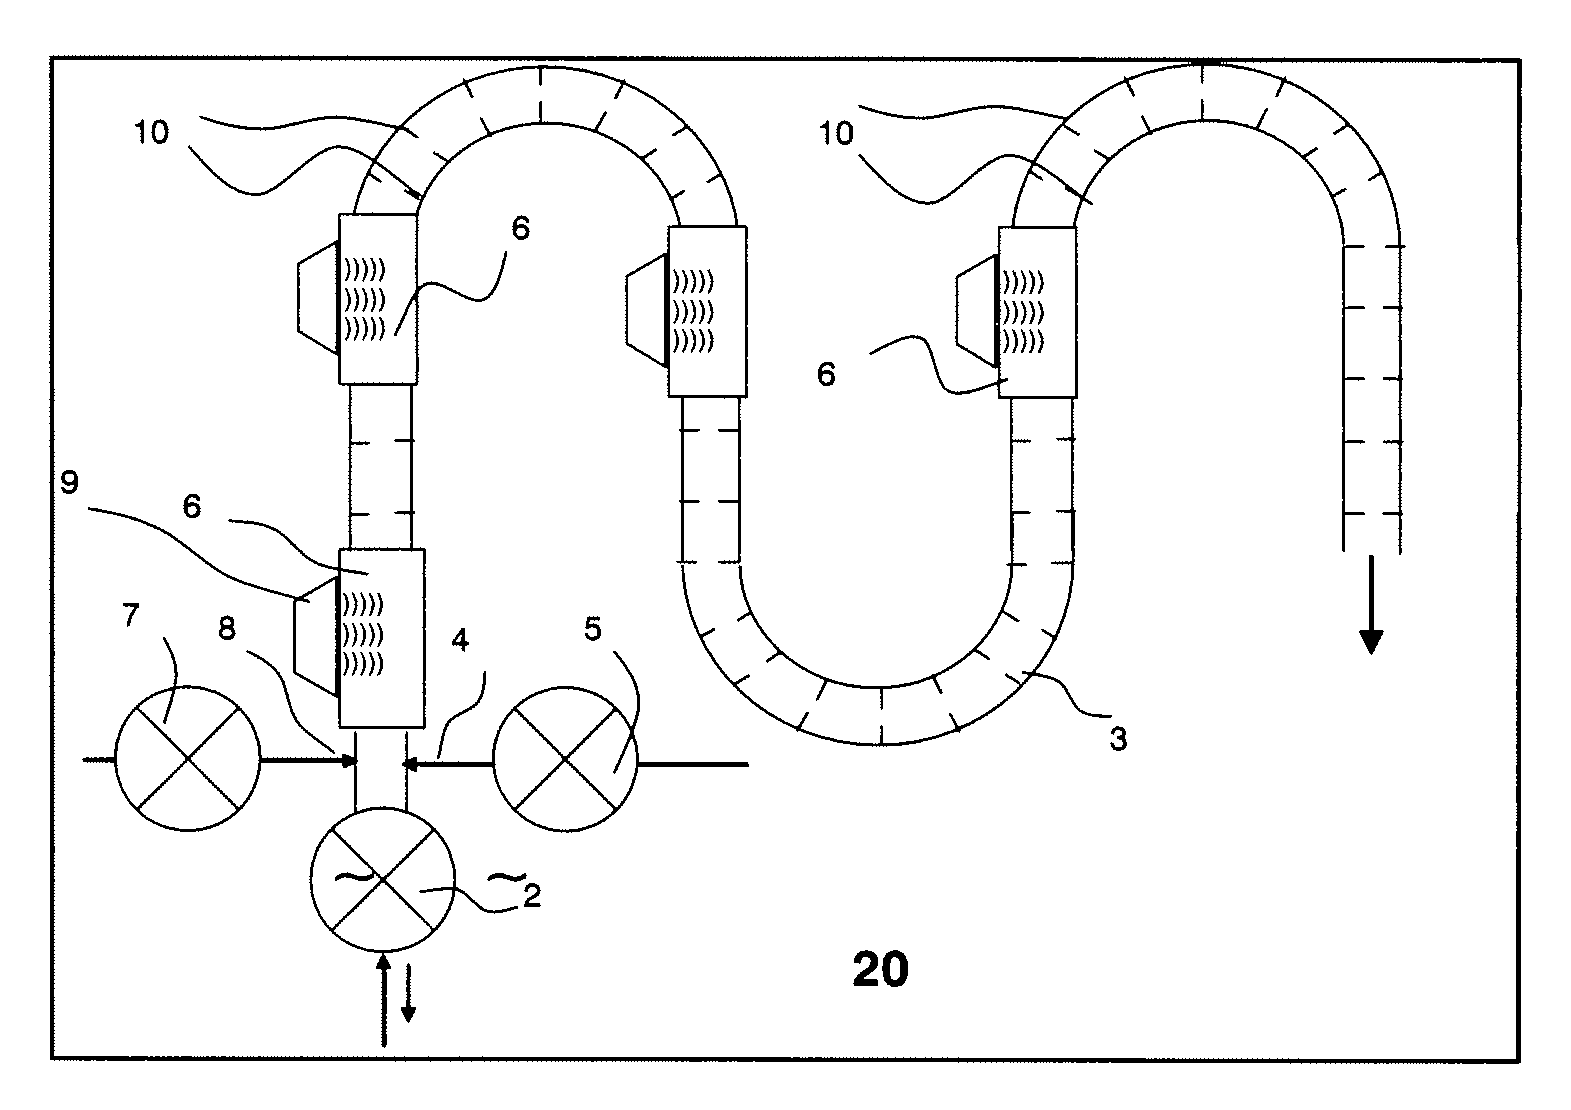  apparatus and process for producing crystals